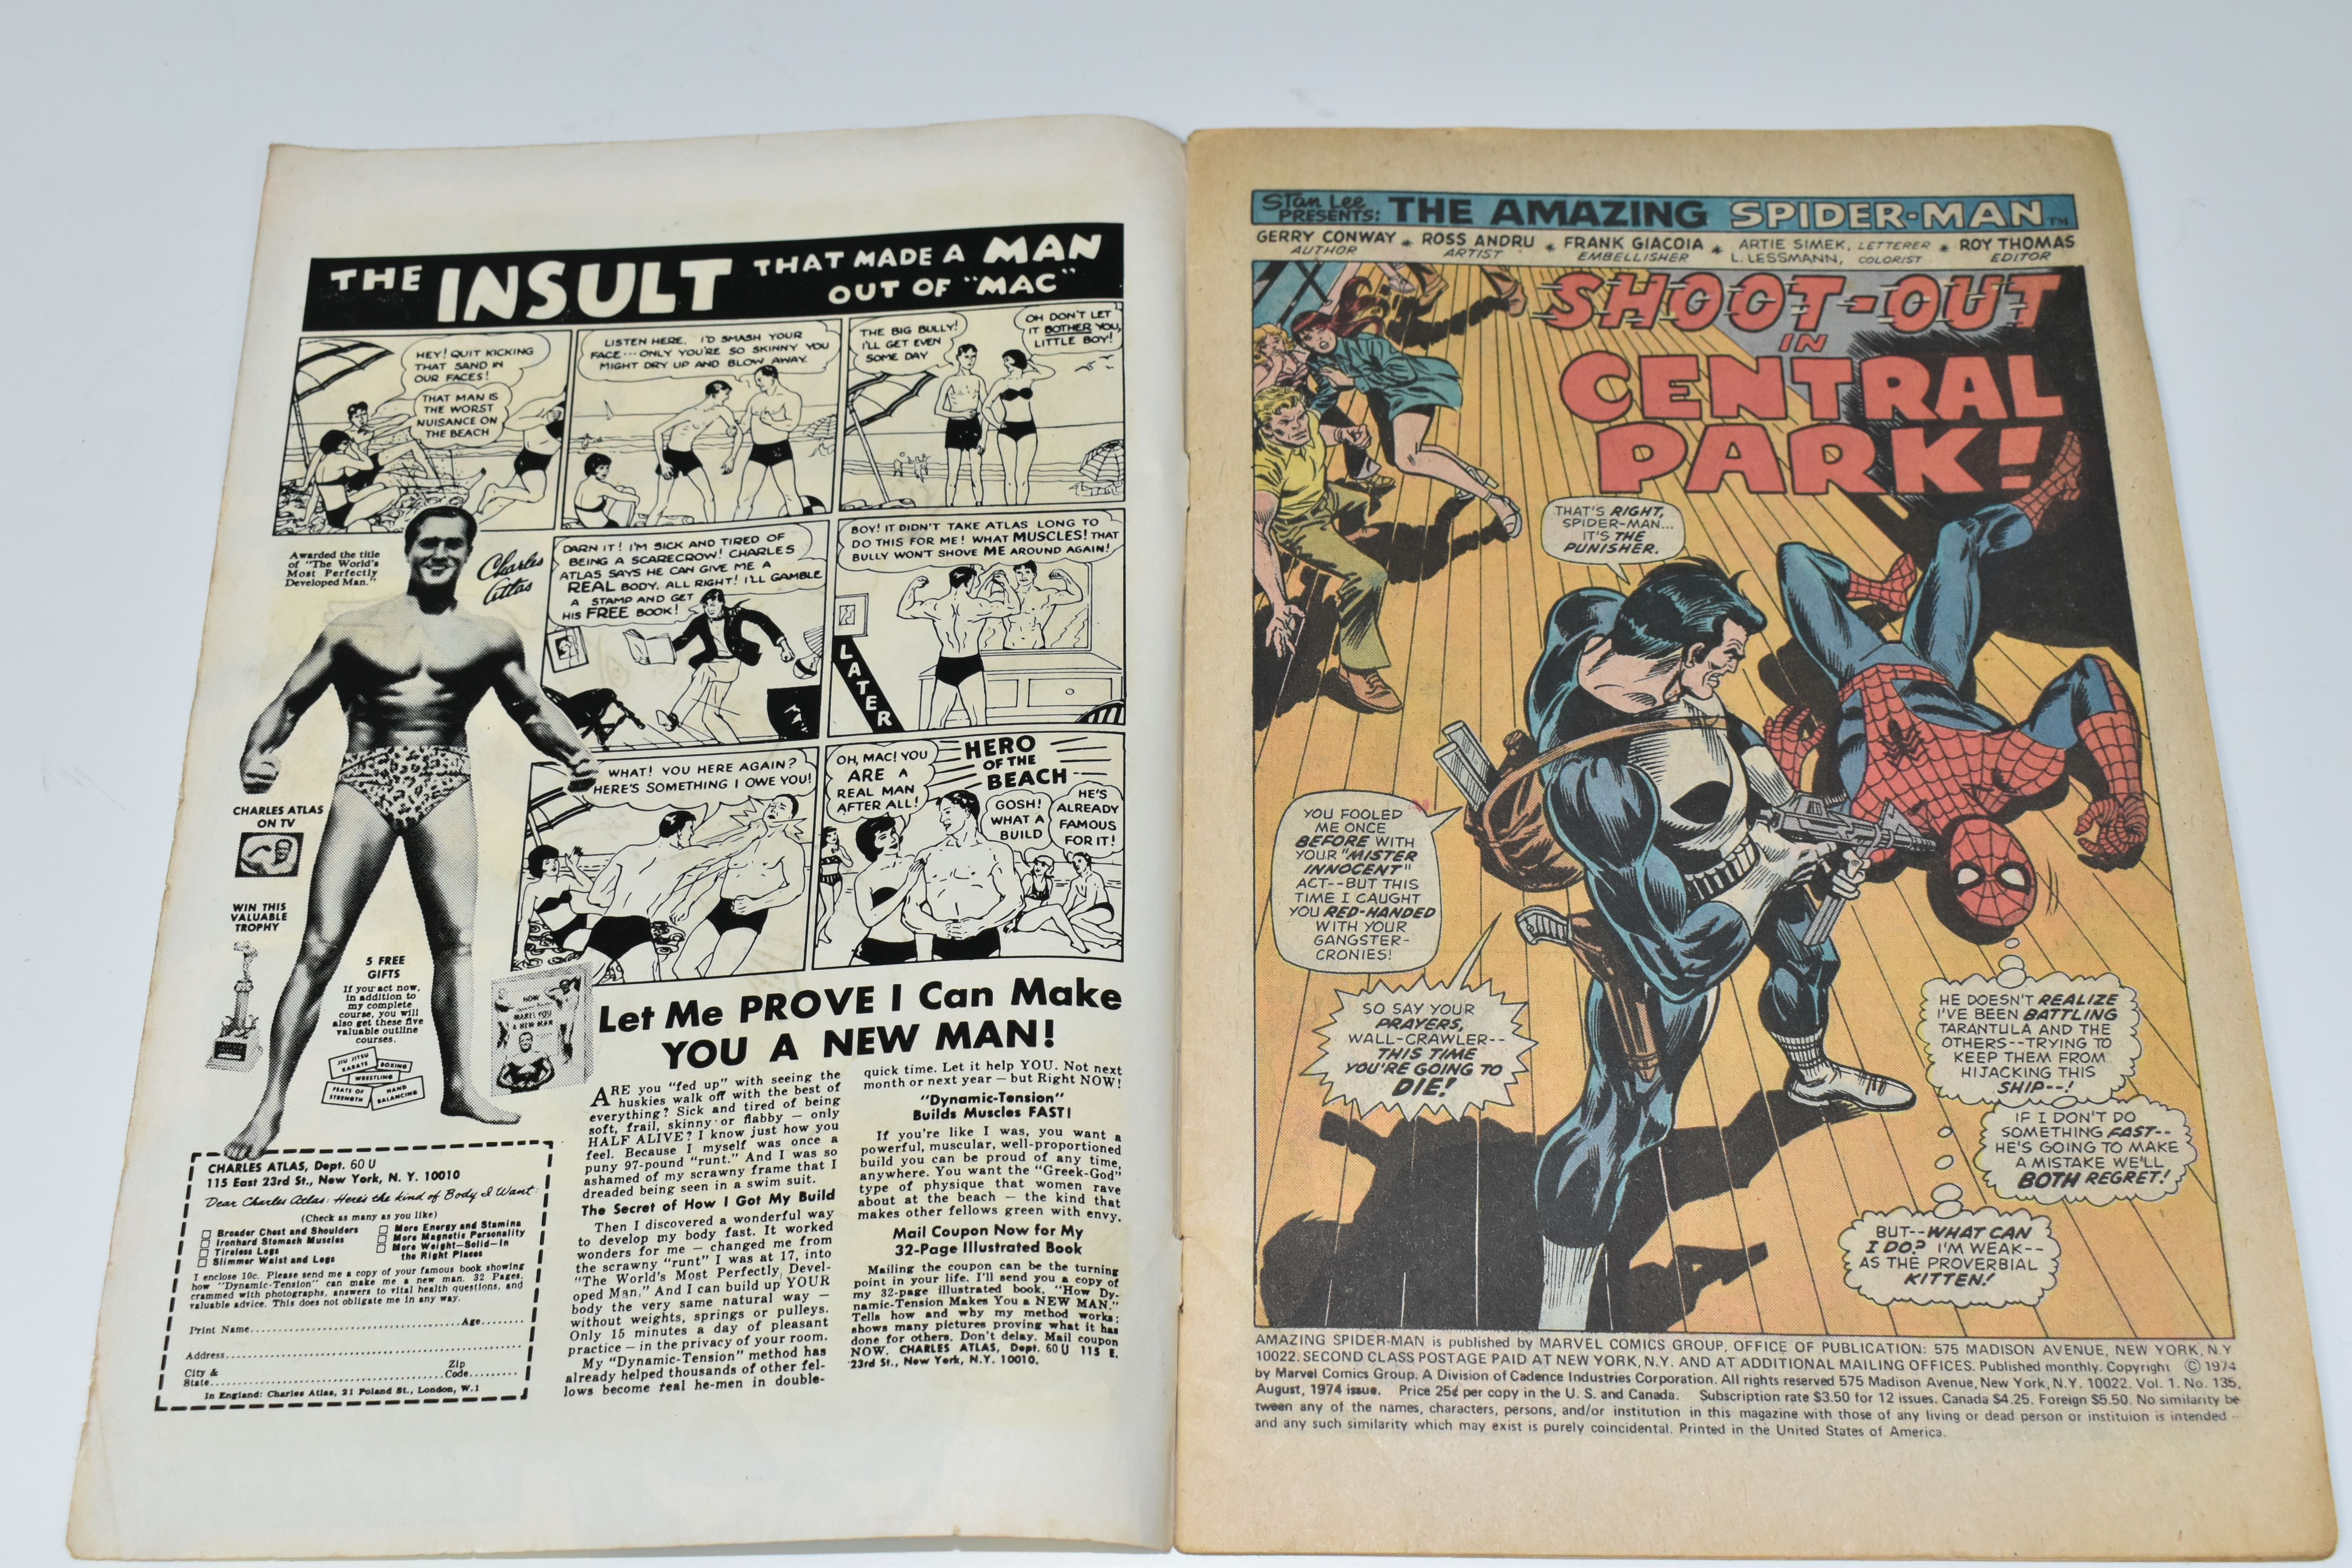 AMAZING SPIDER-MAN No. 135, second appearance of The Punisher, front cover has some minor creases, - Image 3 of 6